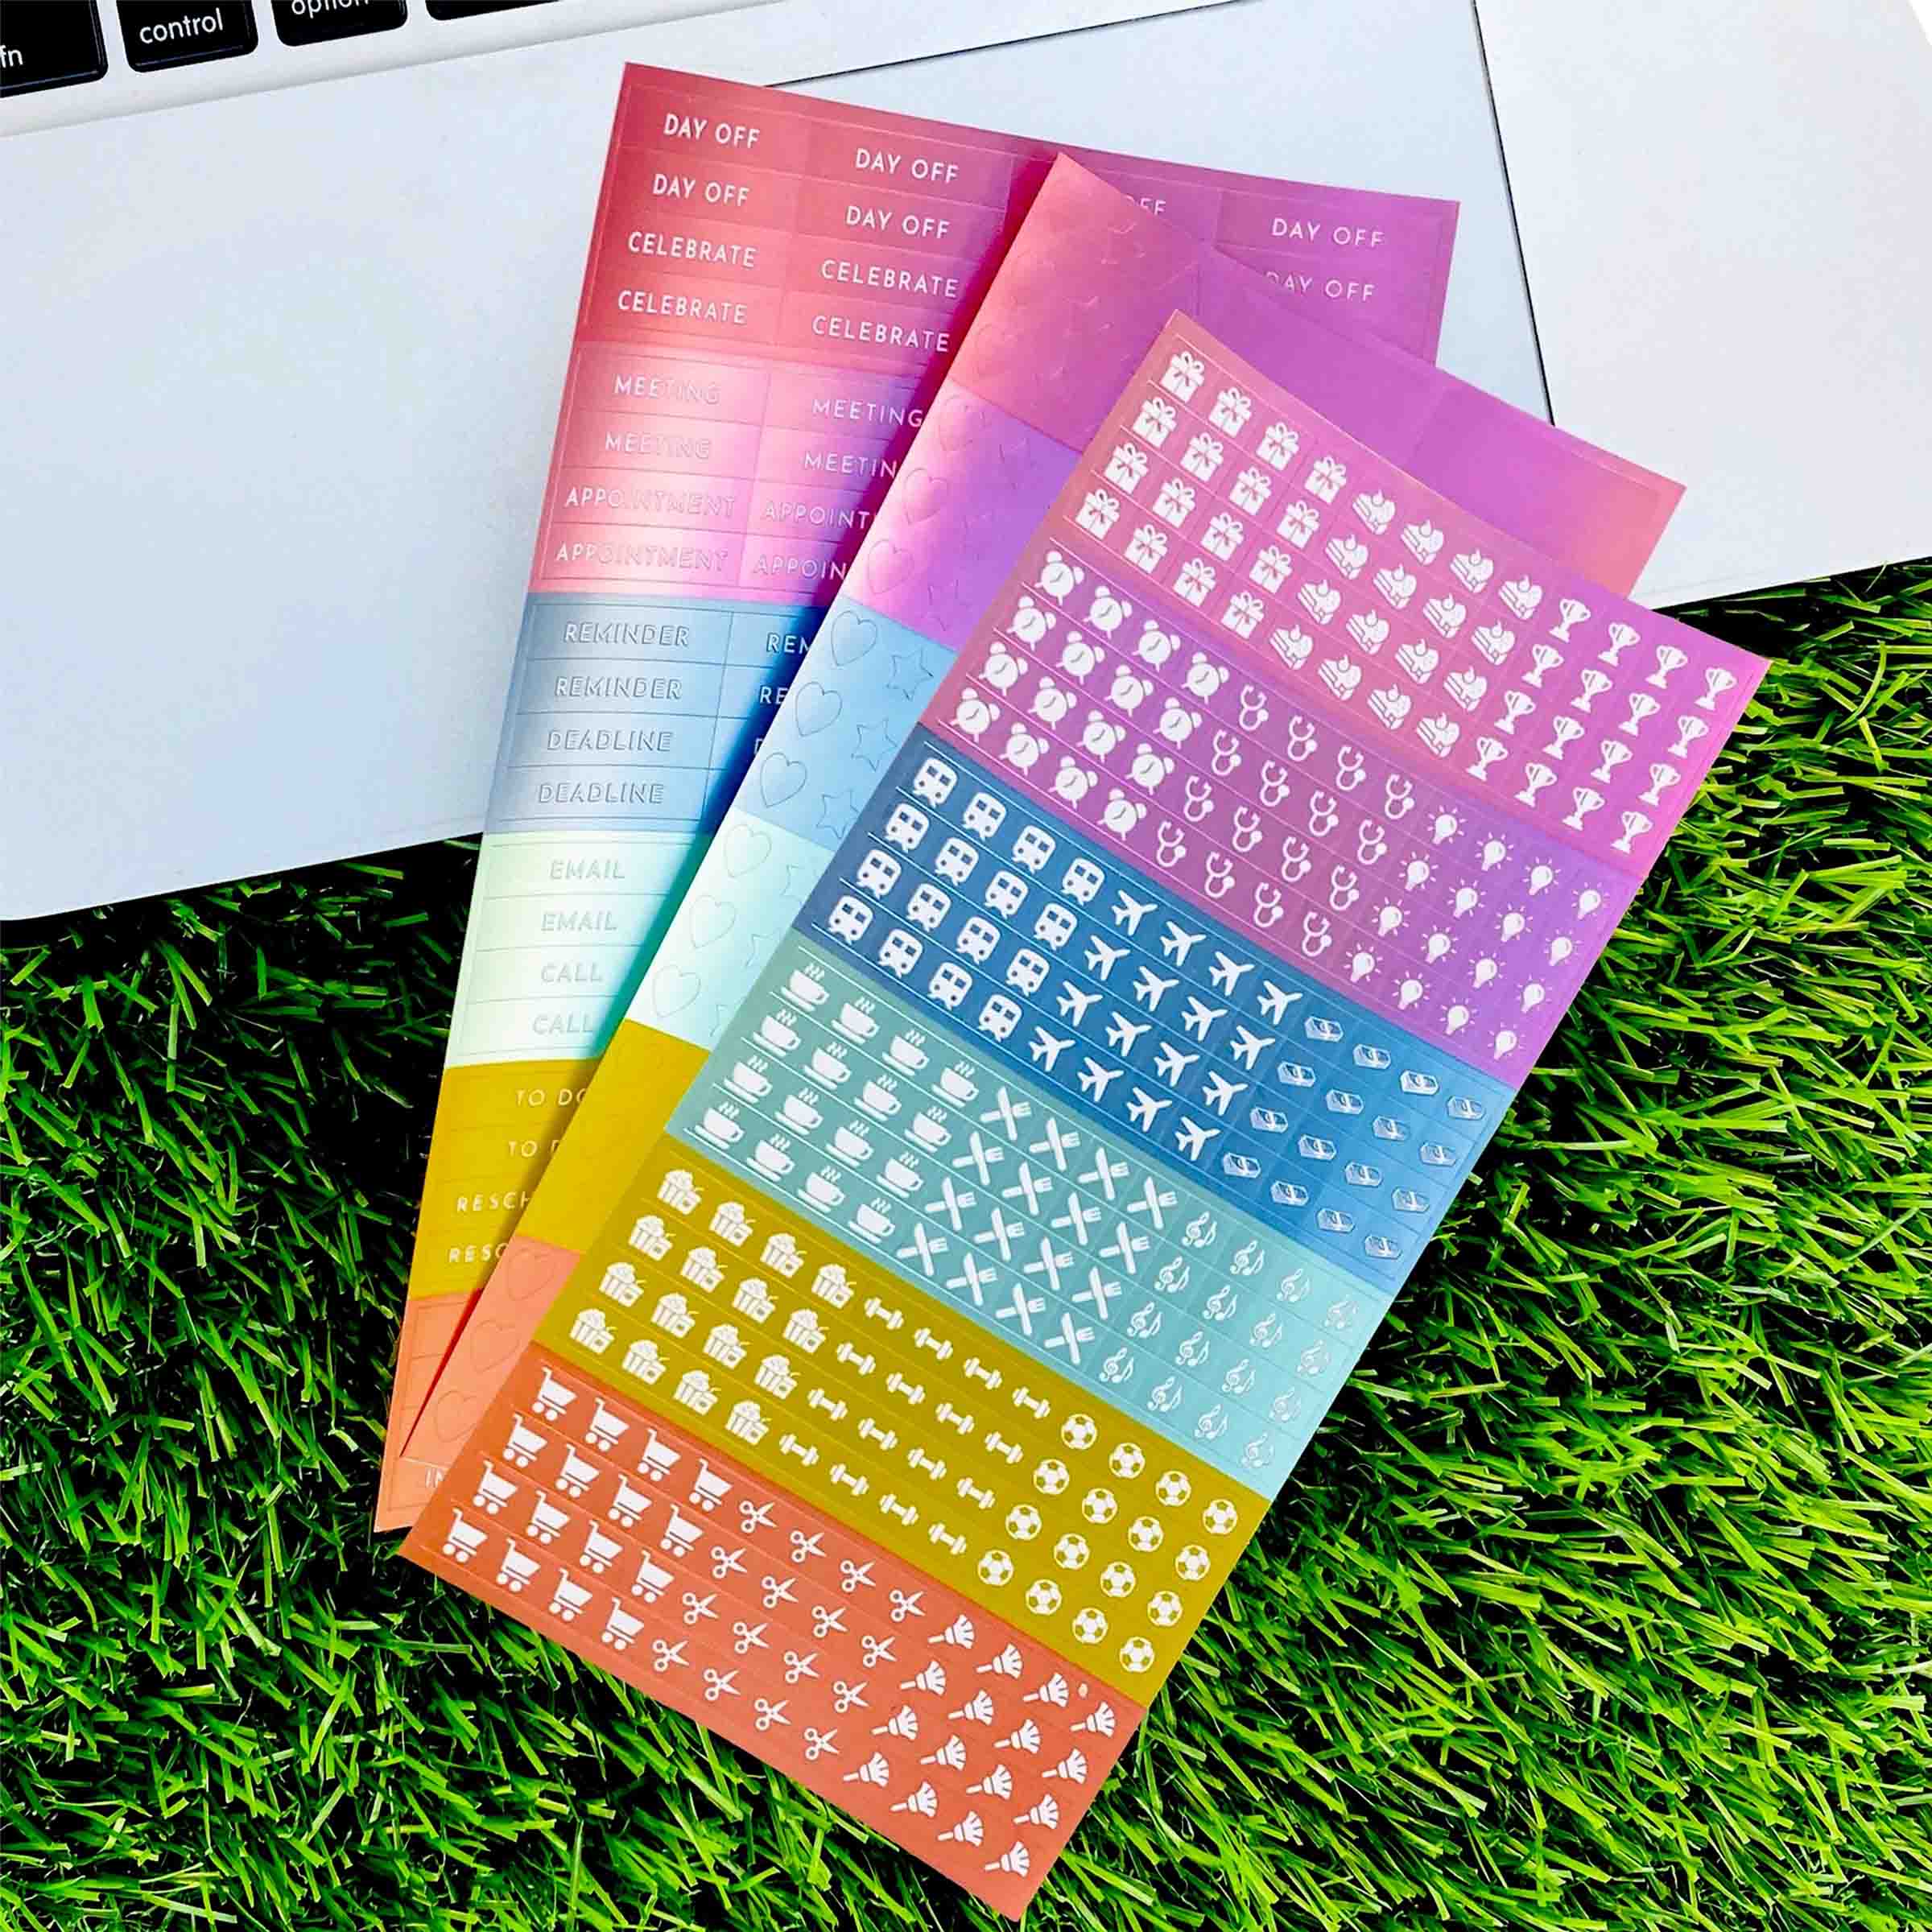  Planner Stickers 1000+ Scrapbook Stickers – Inspirational and  Motivational Journal Stickers - Planner Accessories and Stickers for  Planners Pack and Calendar Stickers for Adults Planner : Office Products